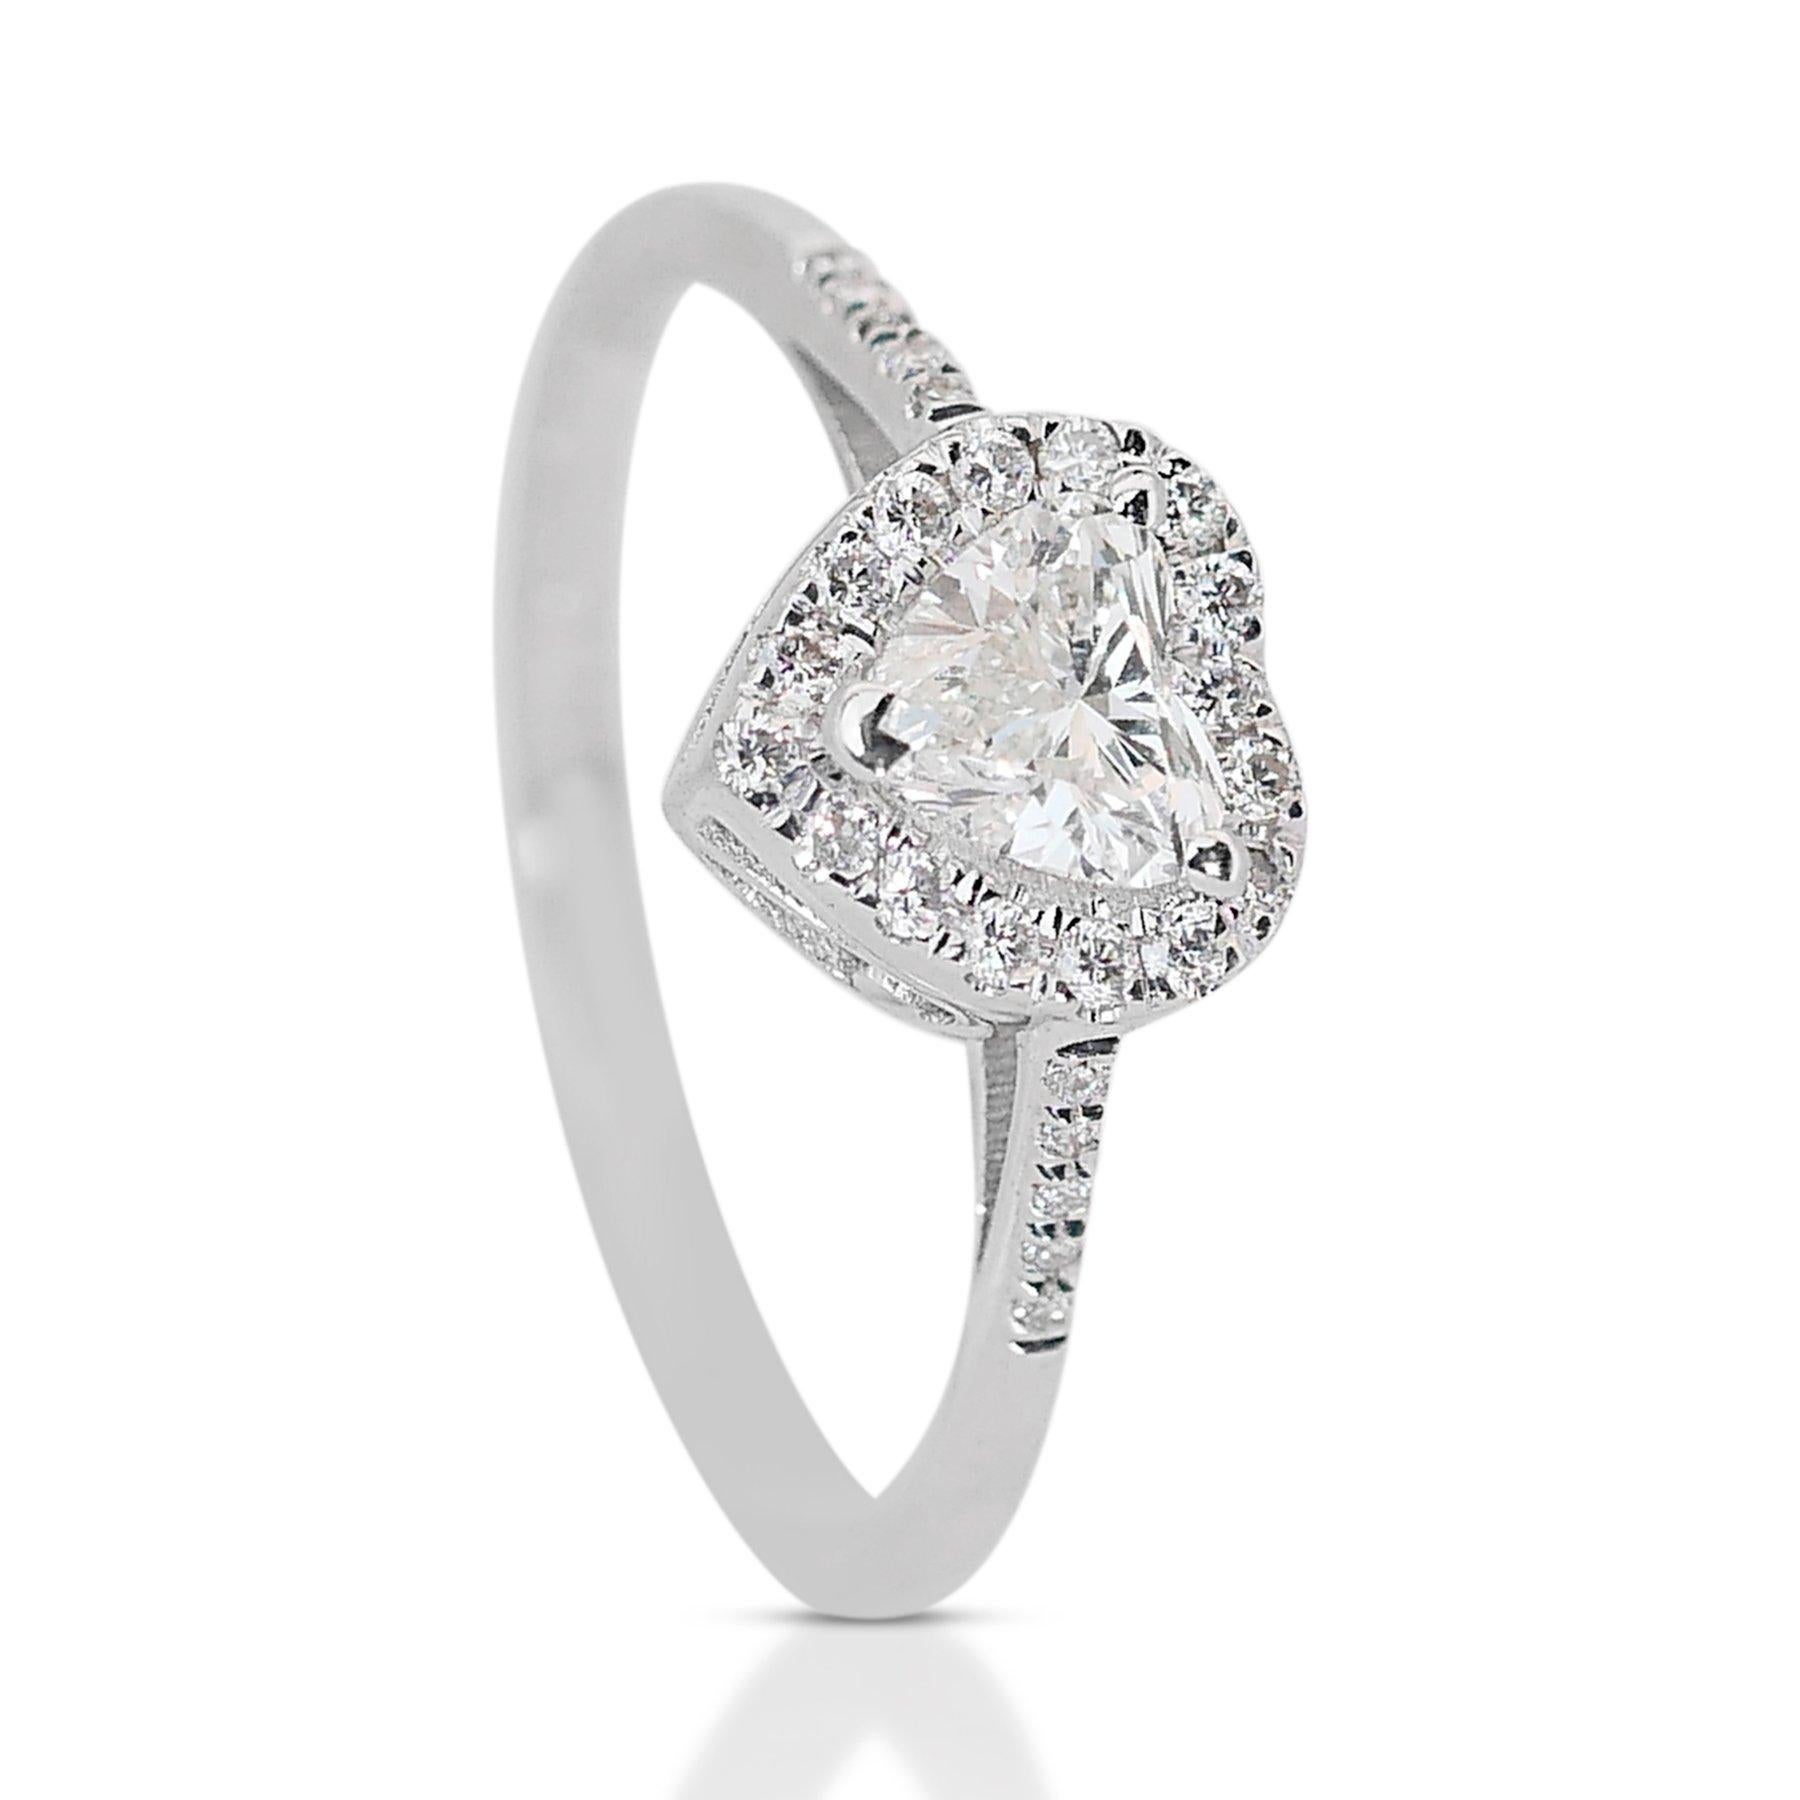 Round Cut Charming 0.75ct Diamonds Halo Ring in 18k White Gold - IGI Certified For Sale